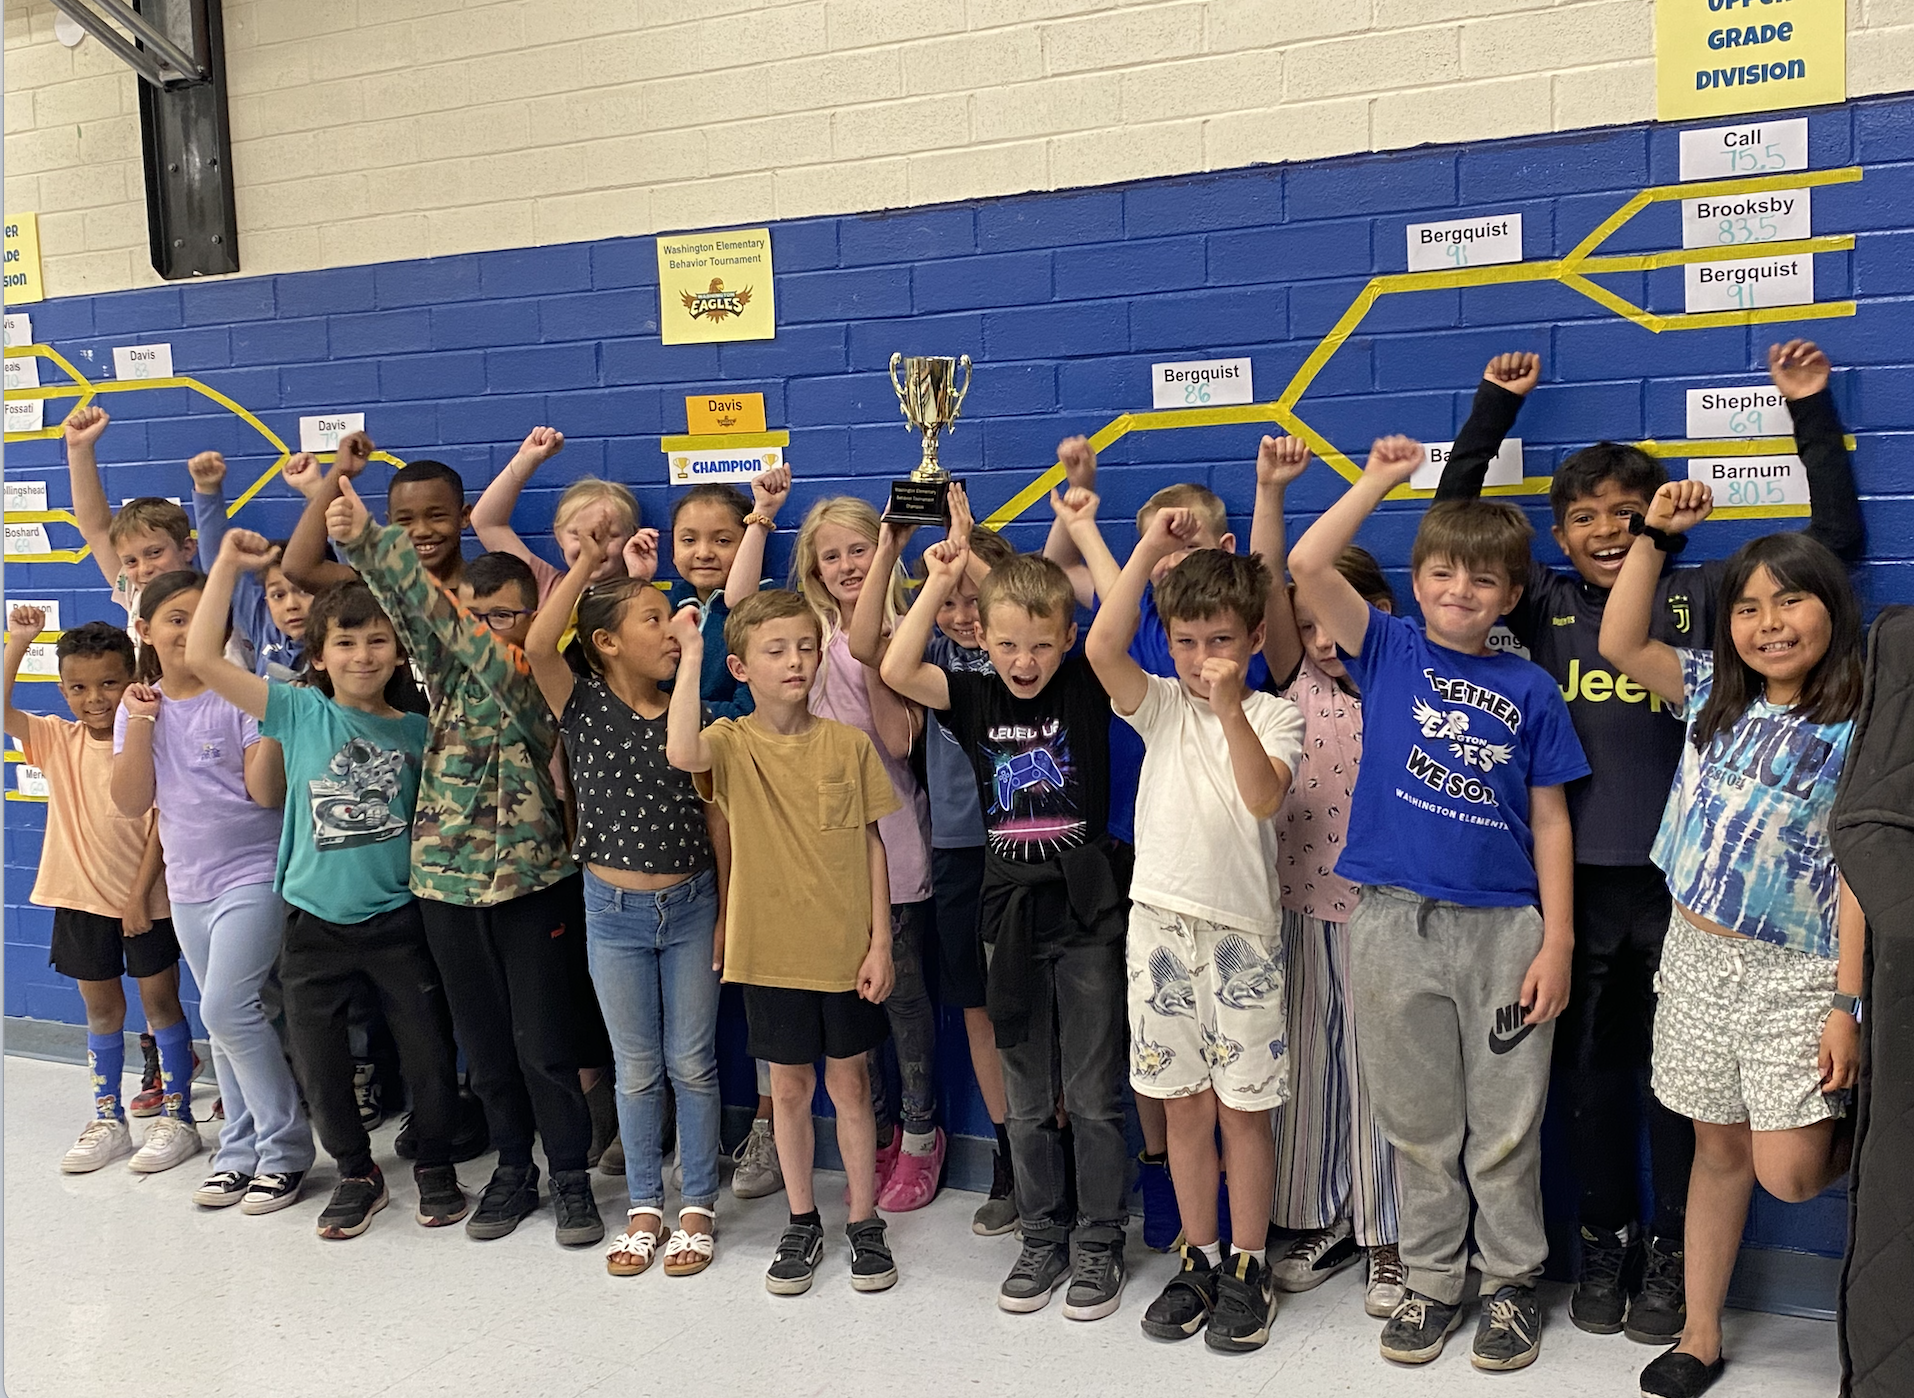 Mrs. Davis's class is standing in front of the behavior tournament bracket in the lunchroom holding up the championship trophy